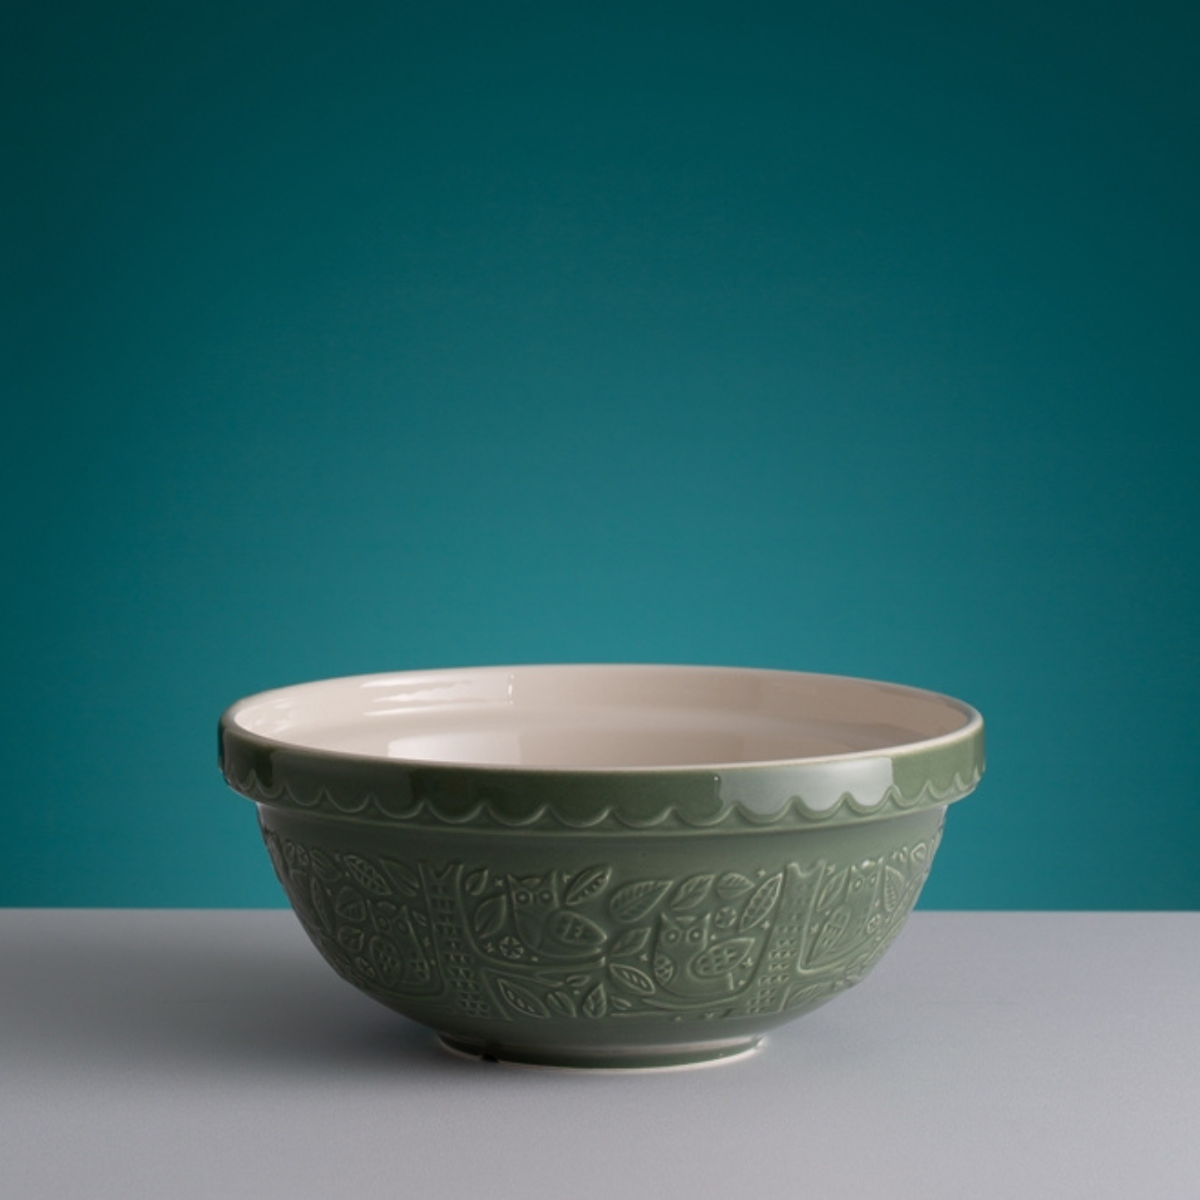 In The Forest S18 Owl Green Mixing Bowl 26cm